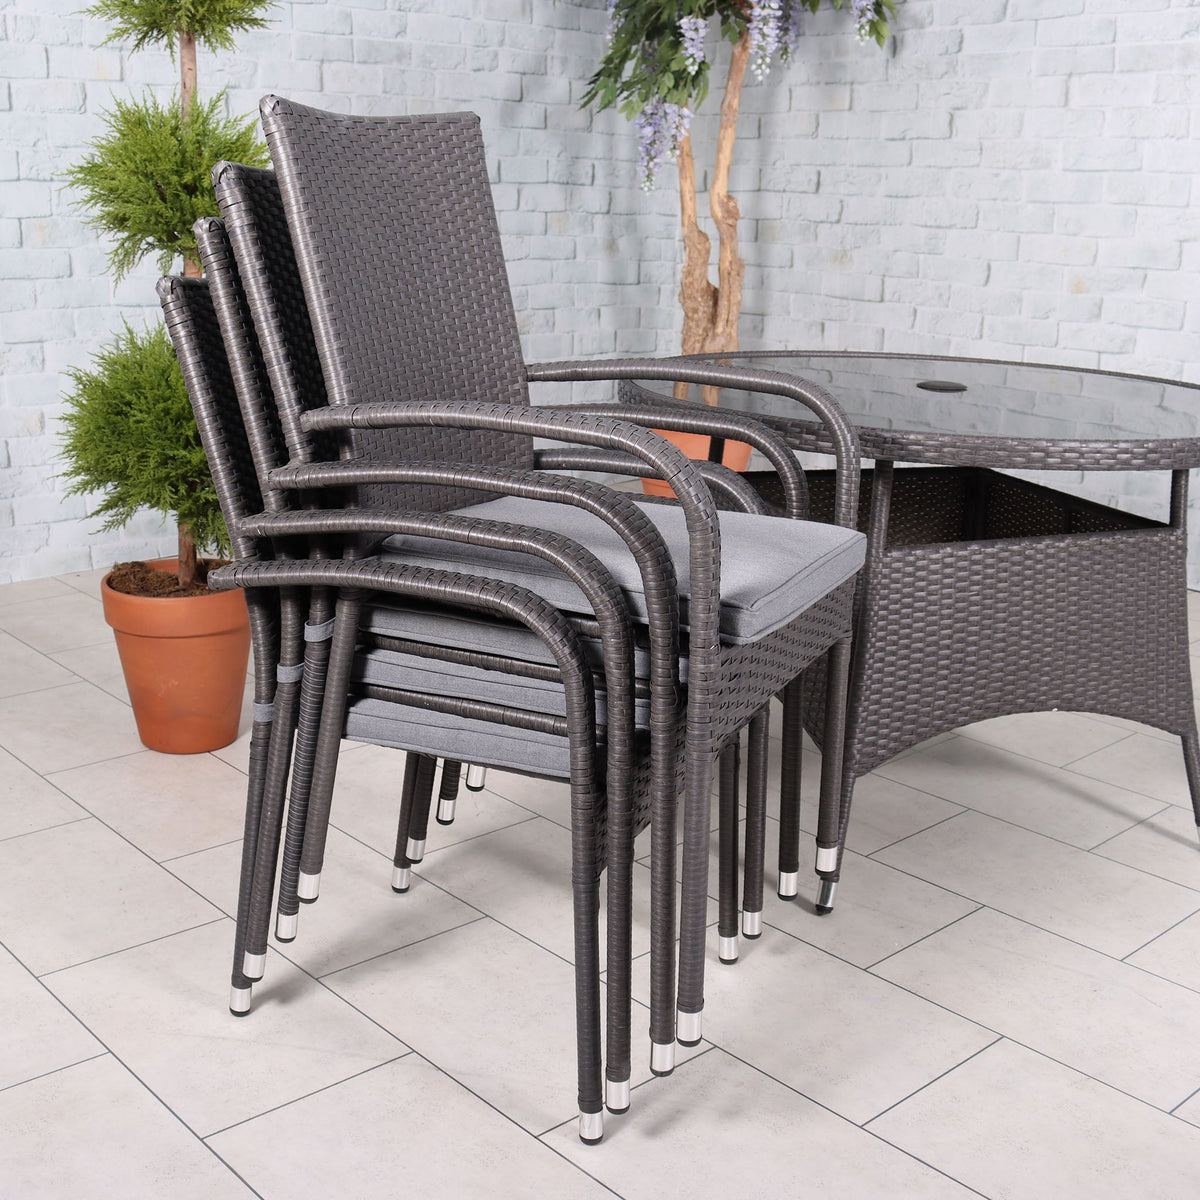 Malaga 4 Seat Stacking Rattan Garden Dining Set Stackable chairs